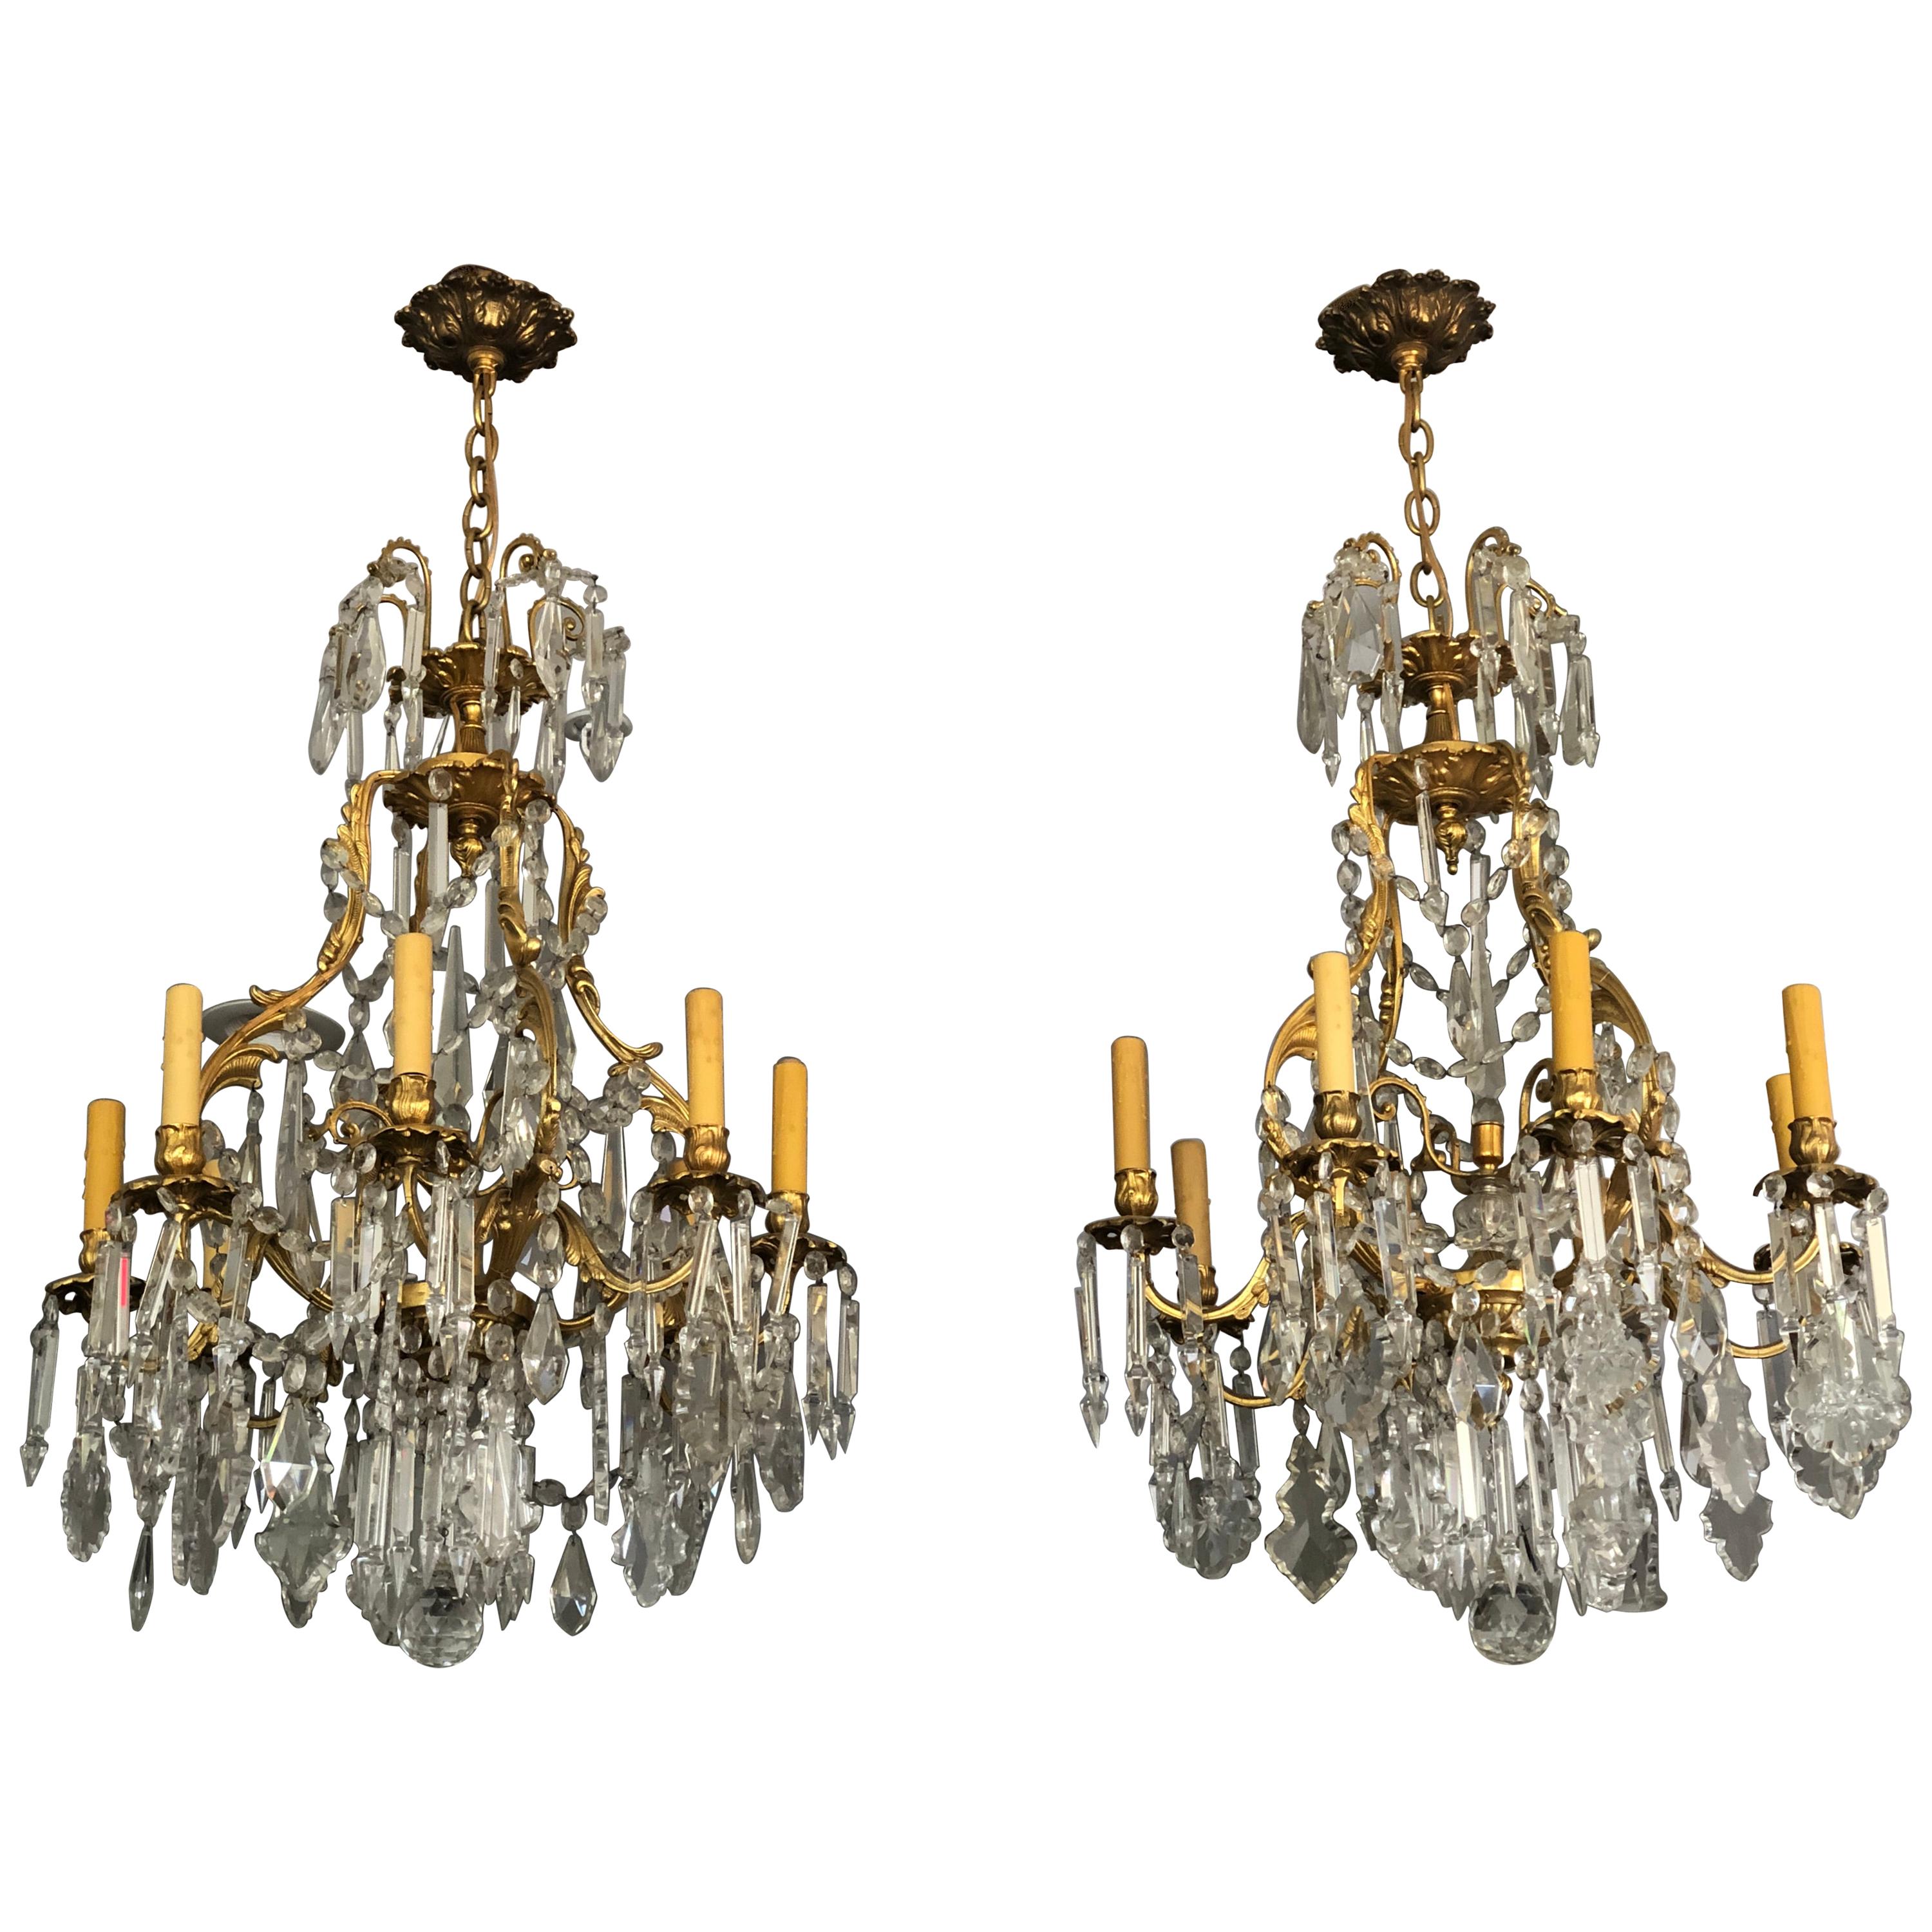 Pair Of Gilt Bronze and Crystal 19th Century Louis XV Chandeliers  For Sale